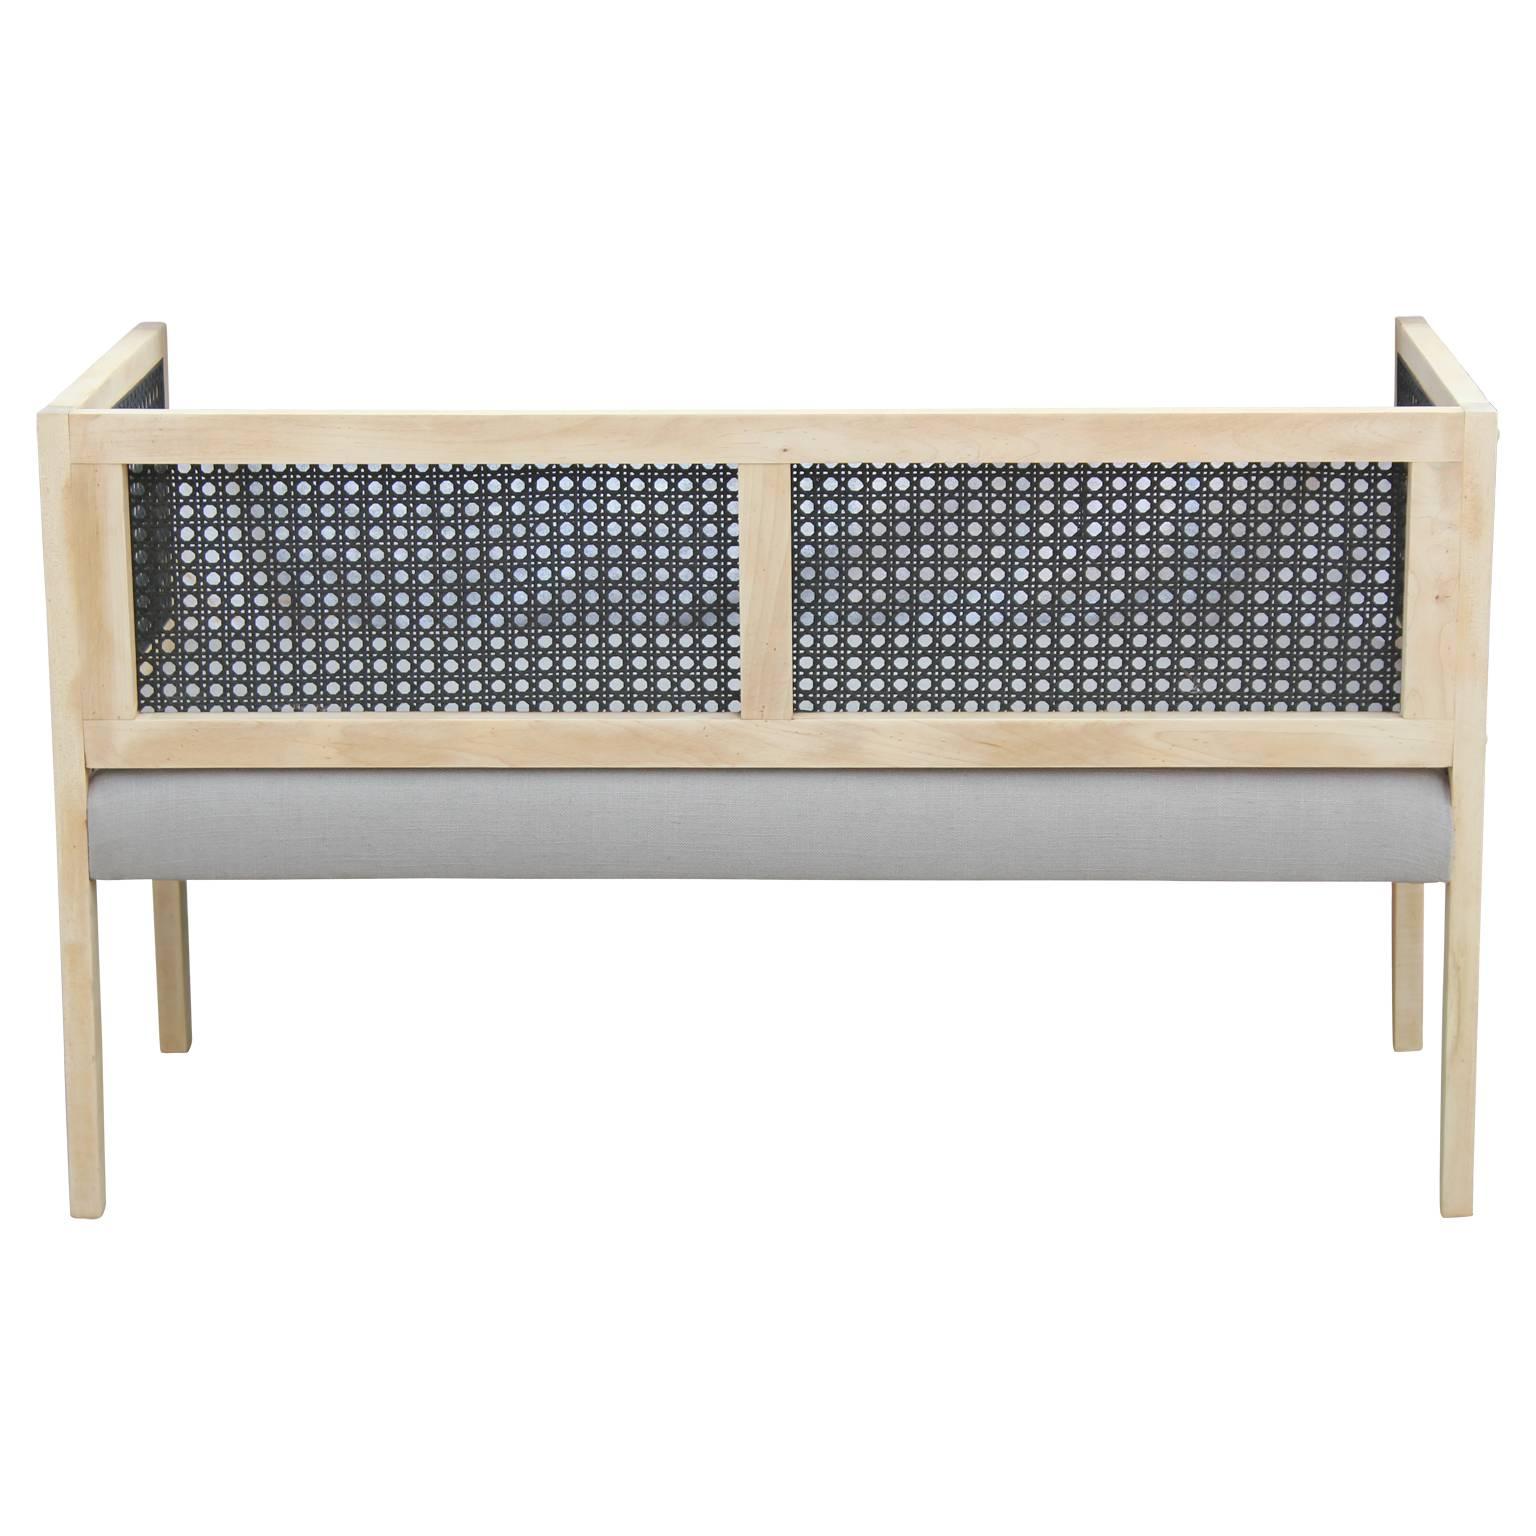 Modern Cane and Bleached Wood Settee or Love Seat in a Light Grey Woven 2